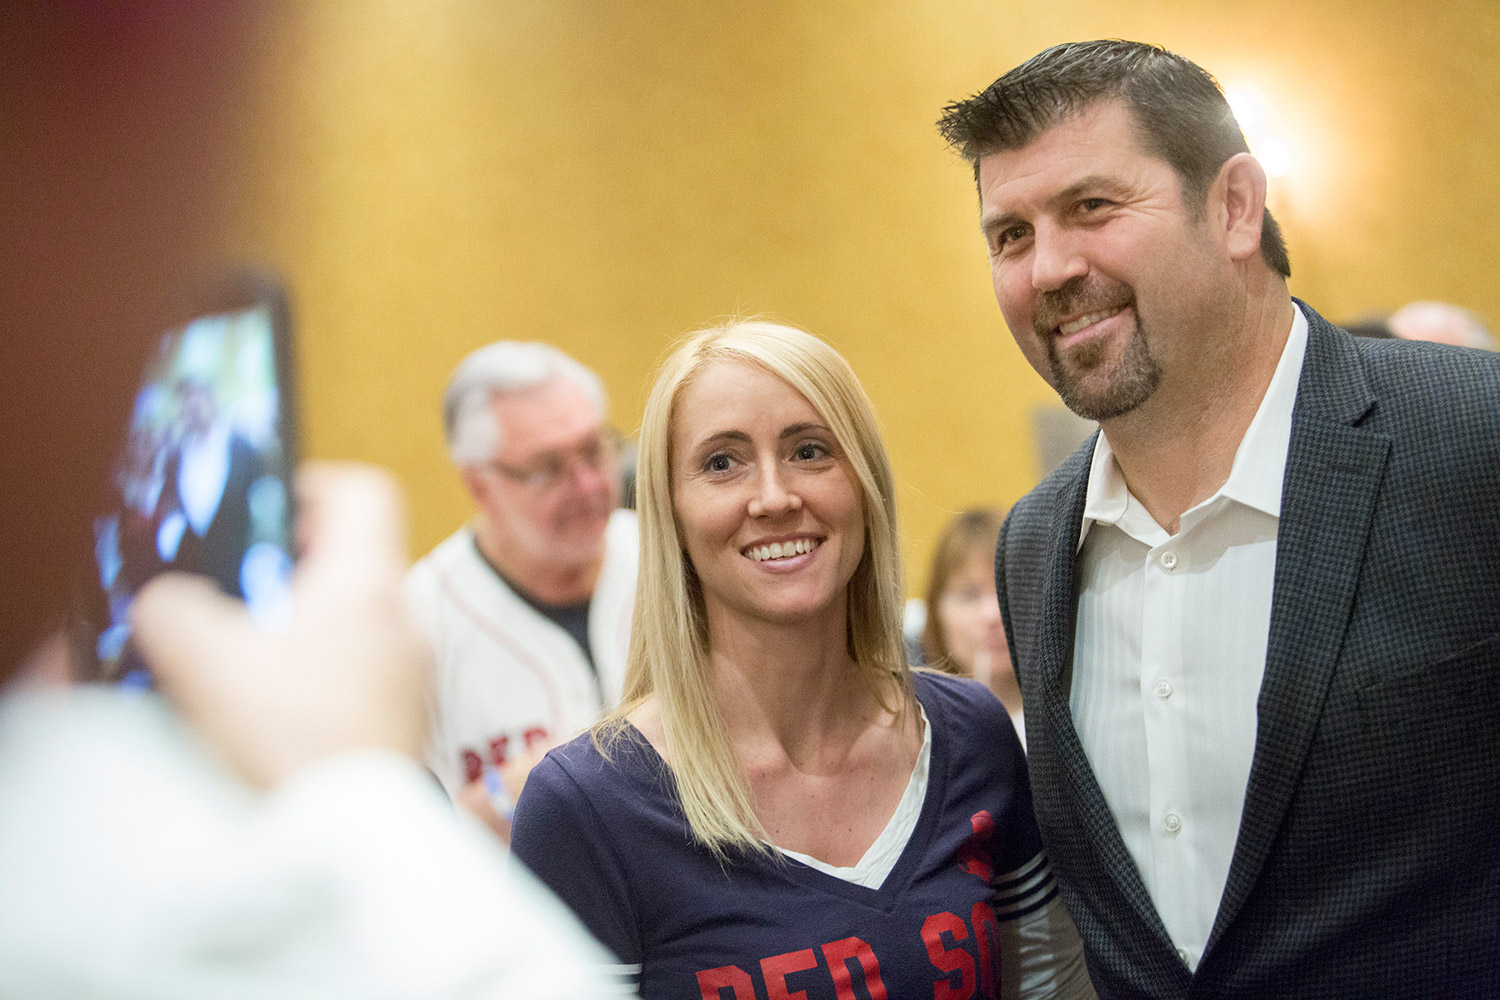 With Jason Varitek in town, Sea Dogs' Hot Stove Dinner stokes Red